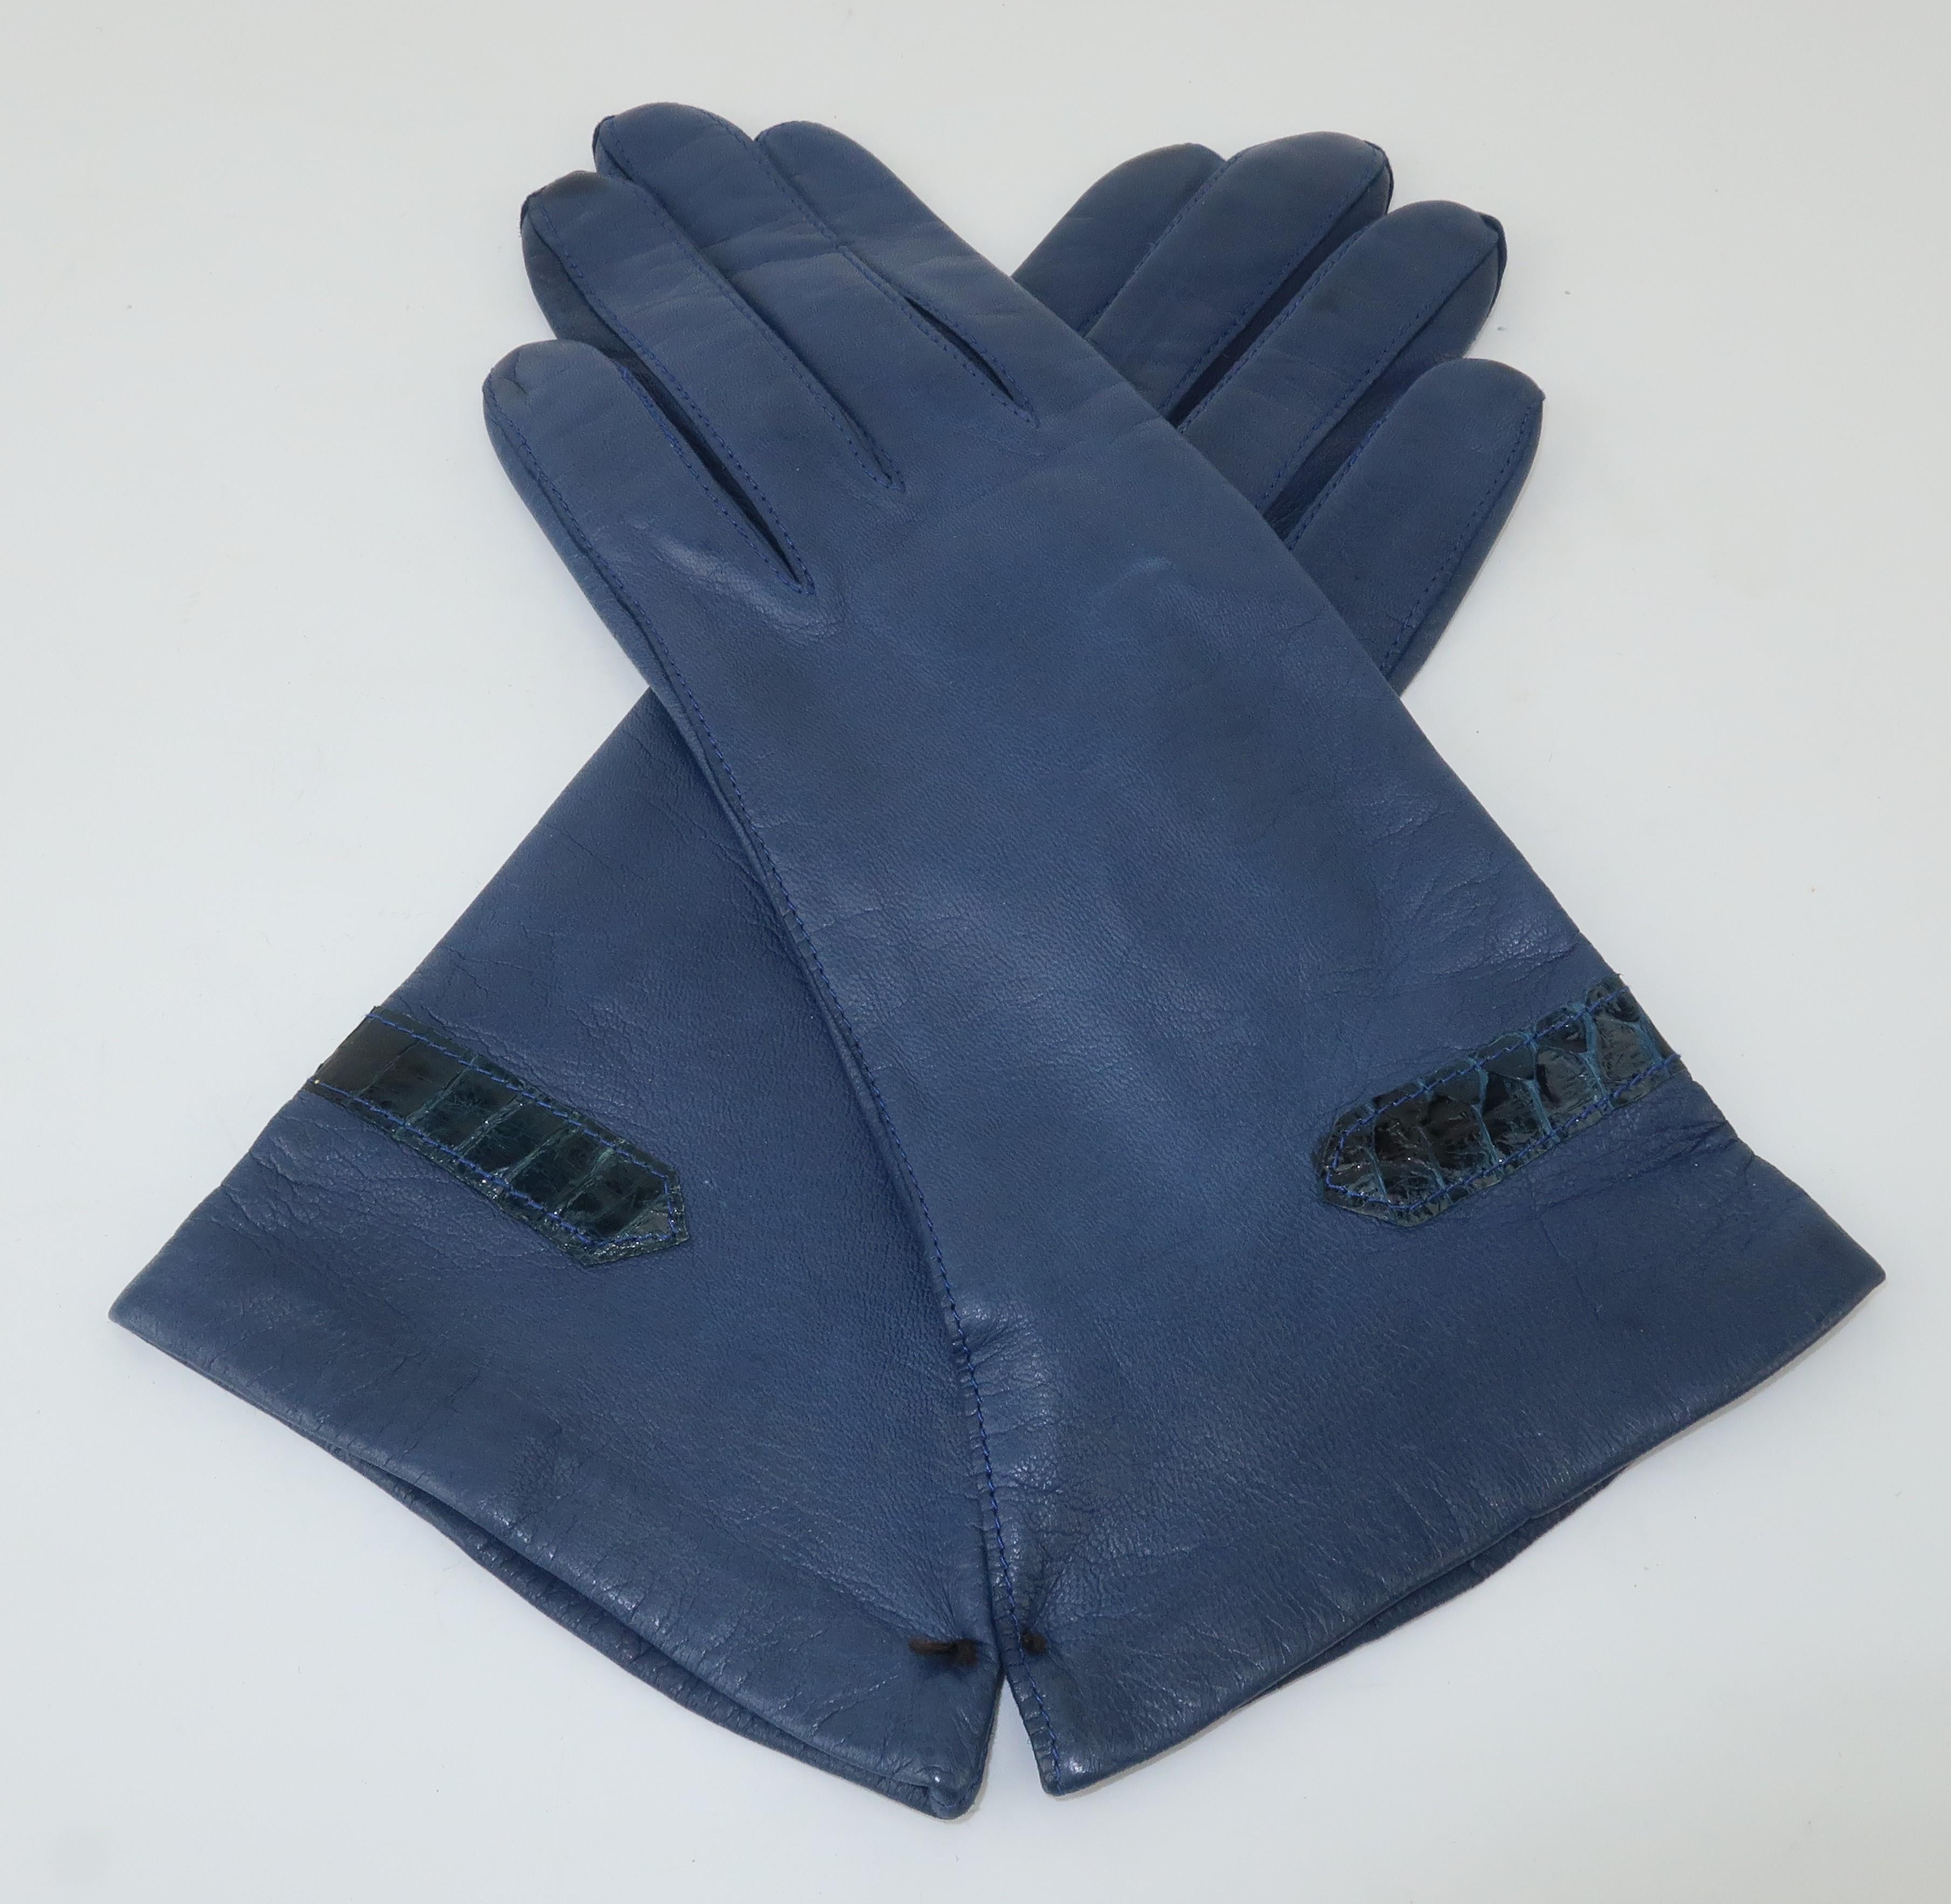 These classy navy blue leather gloves will add a touch of elegance to your winter wardrobe. The gloves feature a coordinating snakeskin detail in an arrow shape at the wrists.  Lined with nylon and appear to be never worn with original blue stitch